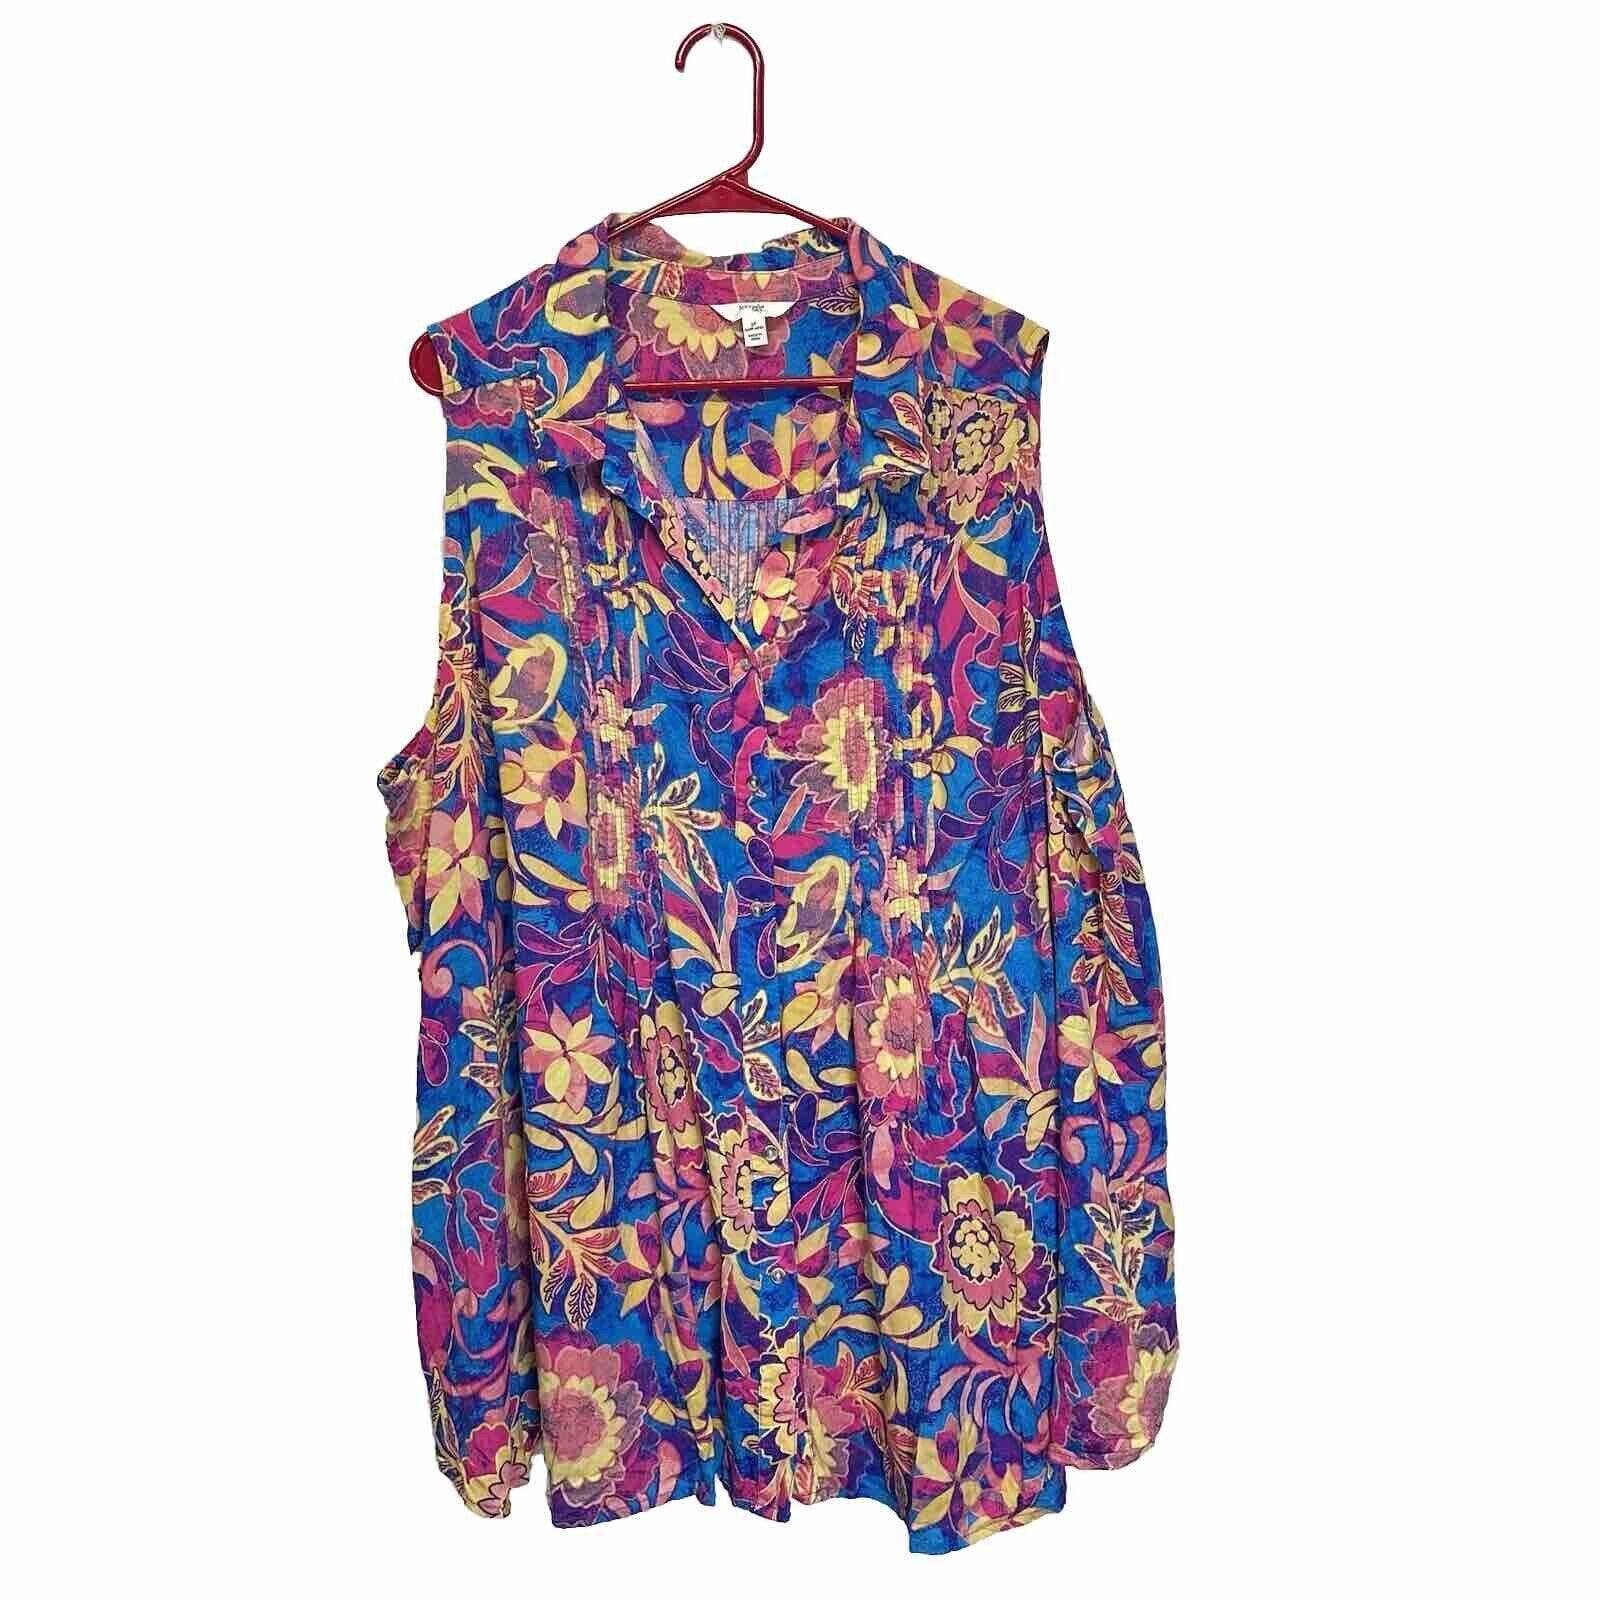 the Lowest price Women’s Boho Baby Doll Retro Floral Print Blouse Peasant Top Shirt Flowy Size 3X iG12oc8gC Fashion